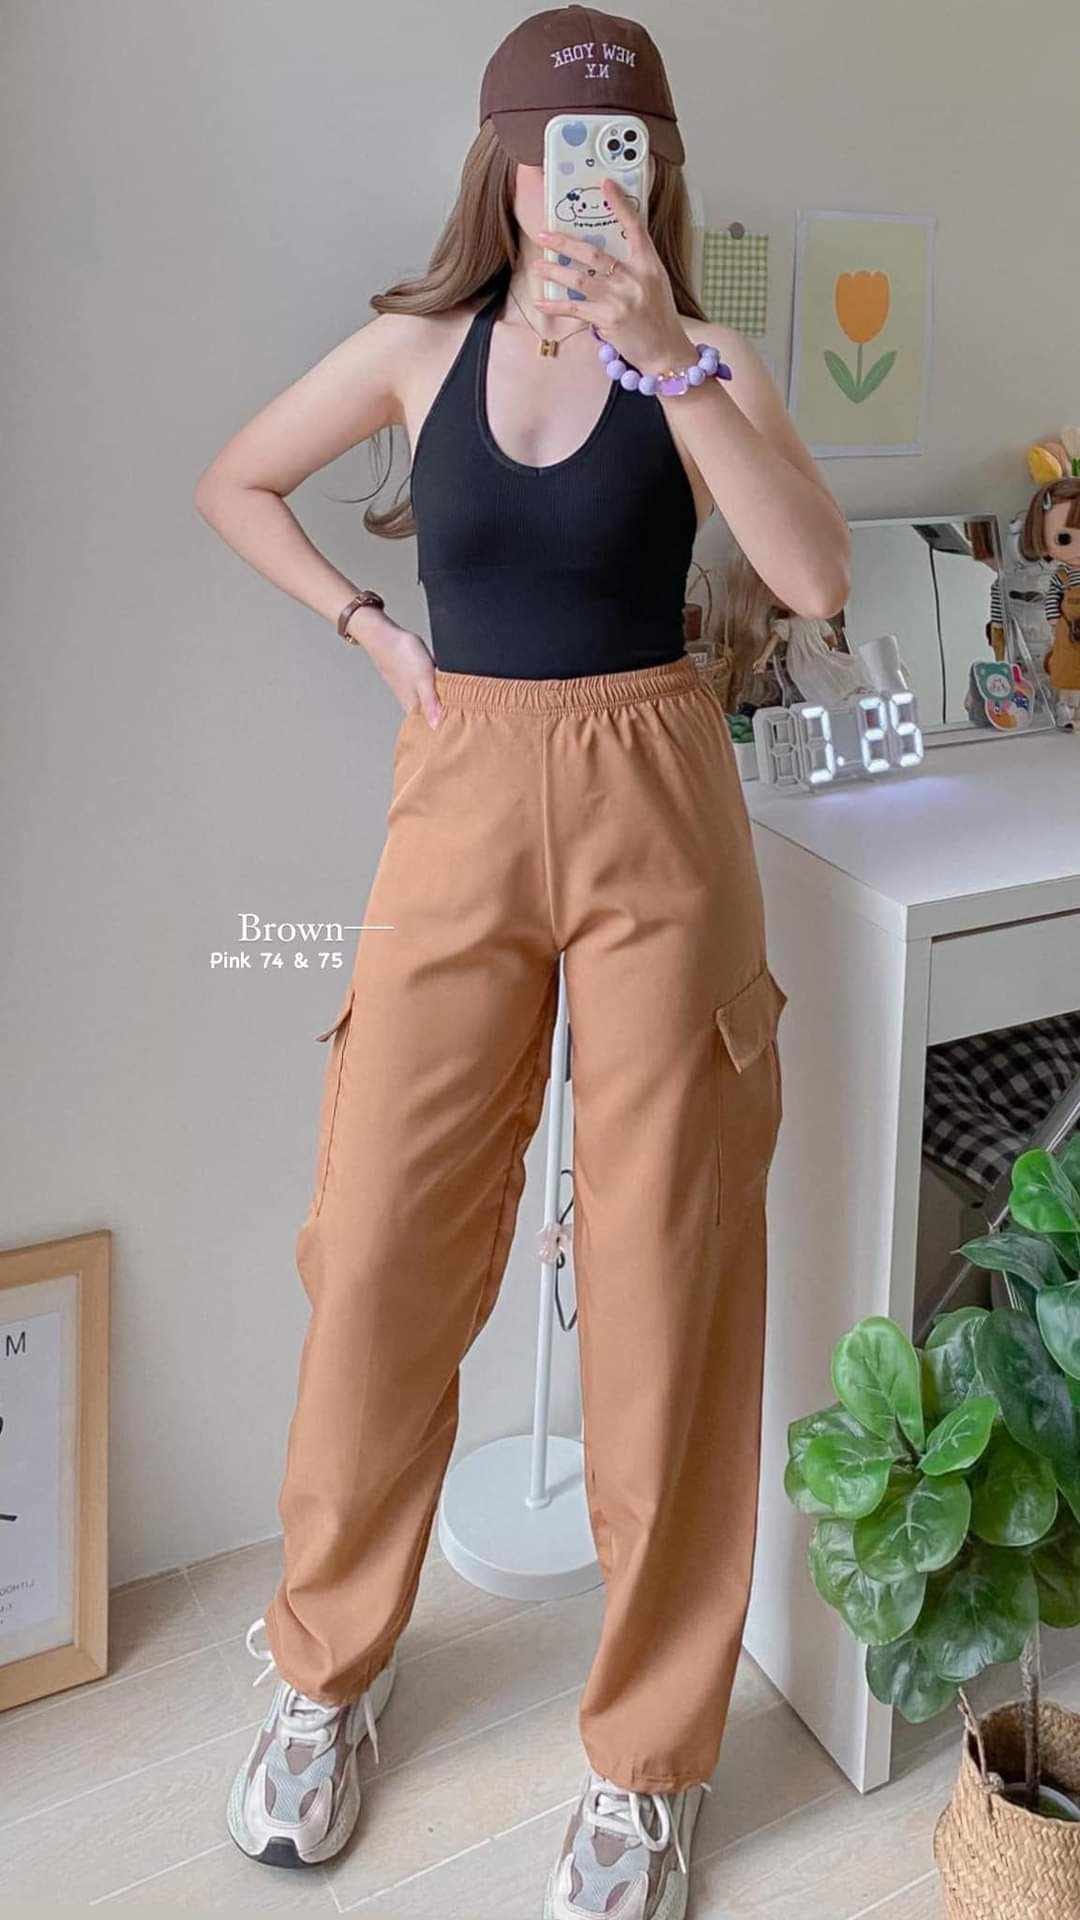 CARGO JOGGER PANTS FOR GIRLS COMFY CARGO PANTS Freesize Sports Wear Women  Trending Outfit OOTD Women Fashion Trend